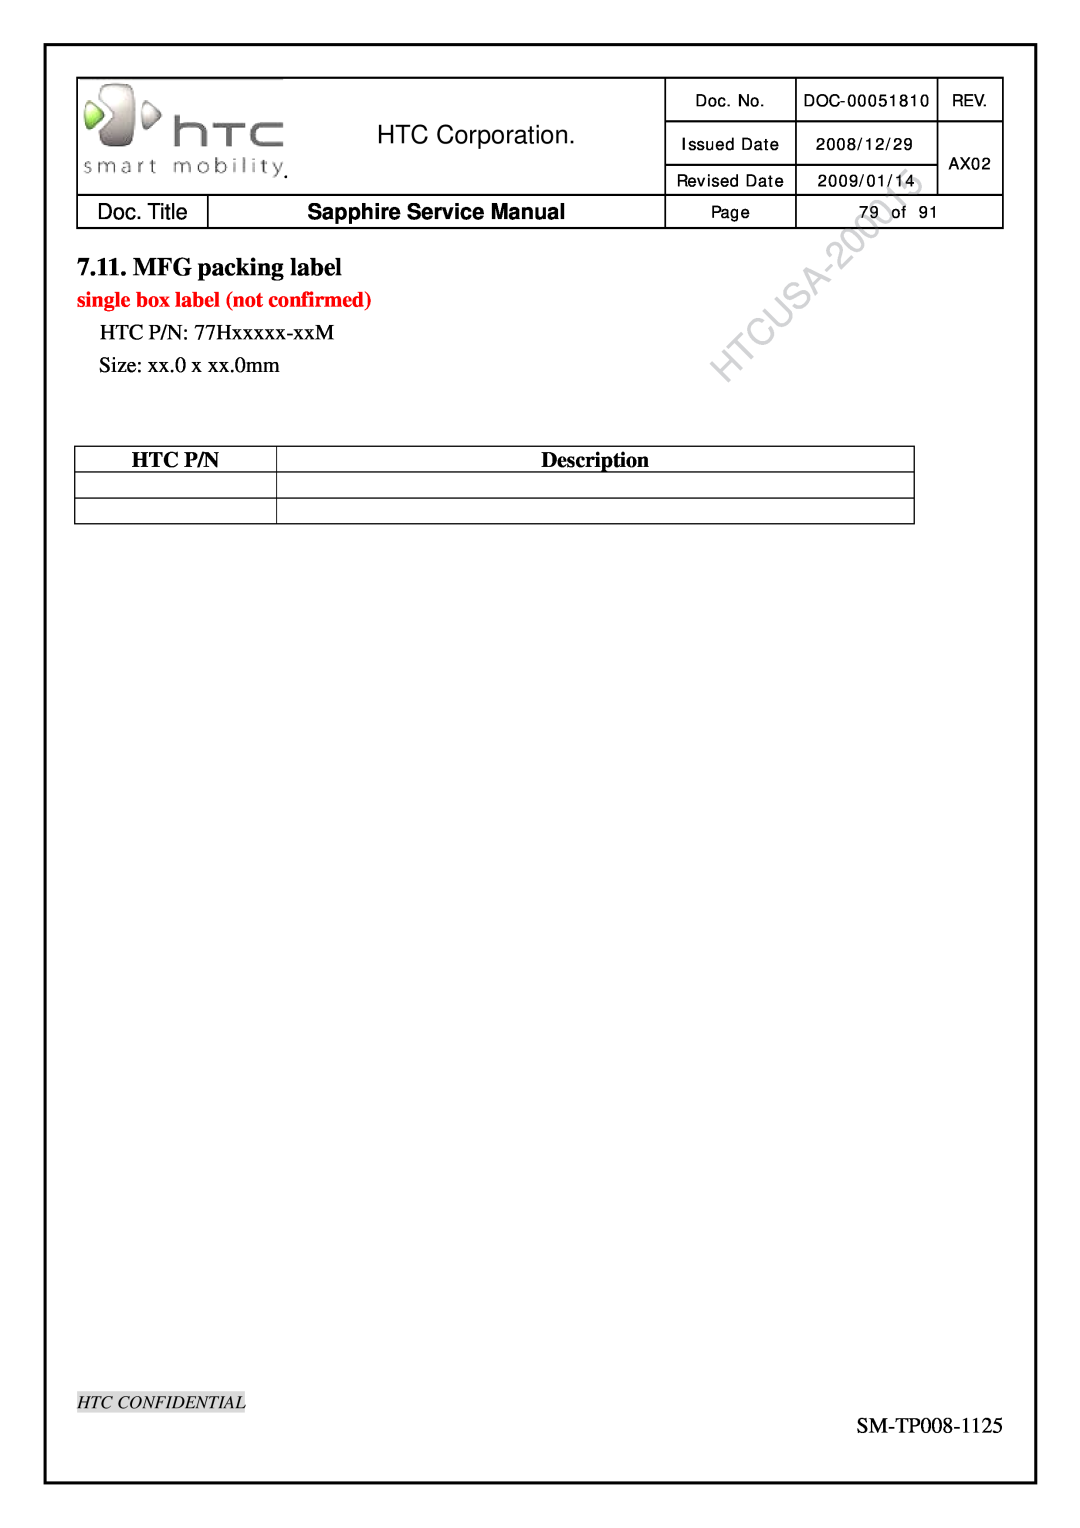 HTC SM-TP008-1125 MFG packing label, single box label not confirmed, HTC Corporation, Sapphire Service Manual, Htc P/N 